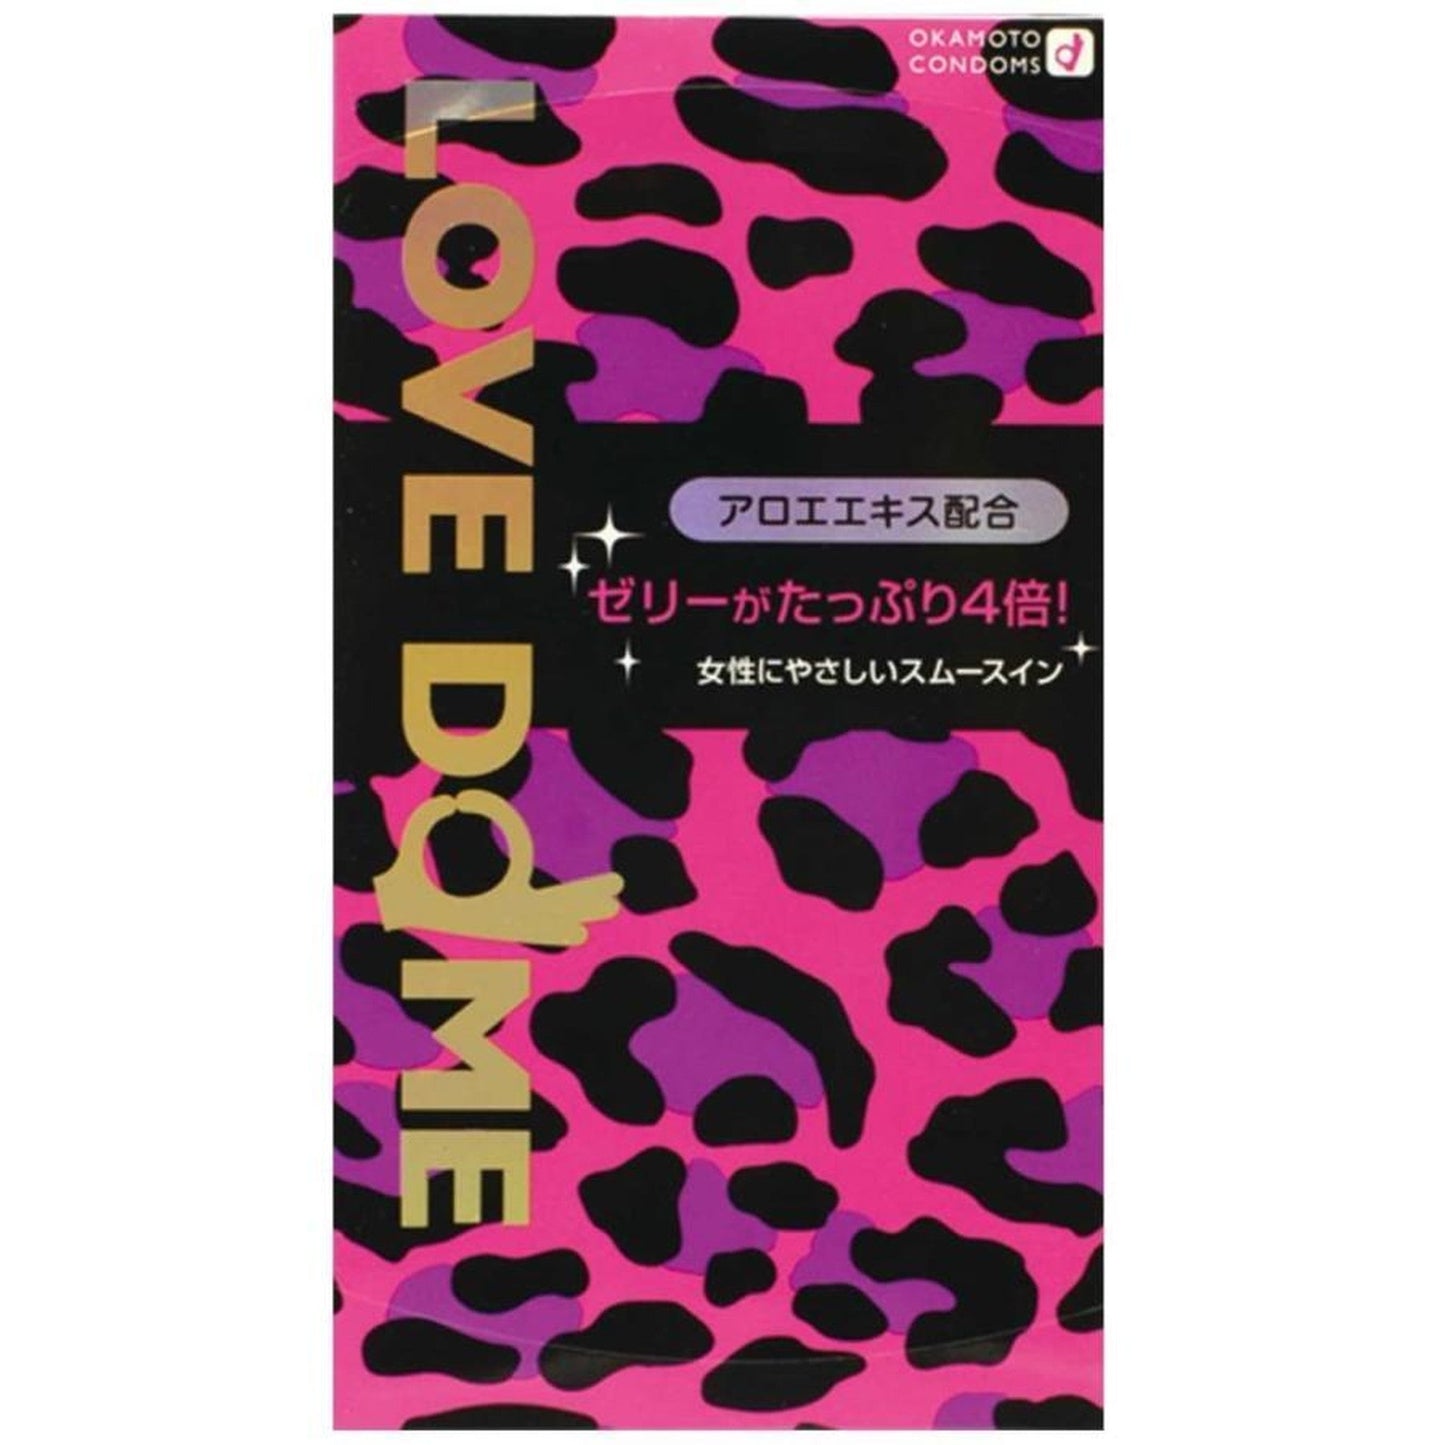 Special Price Okamoto LOVE DOME Panther Condom 12 pieces